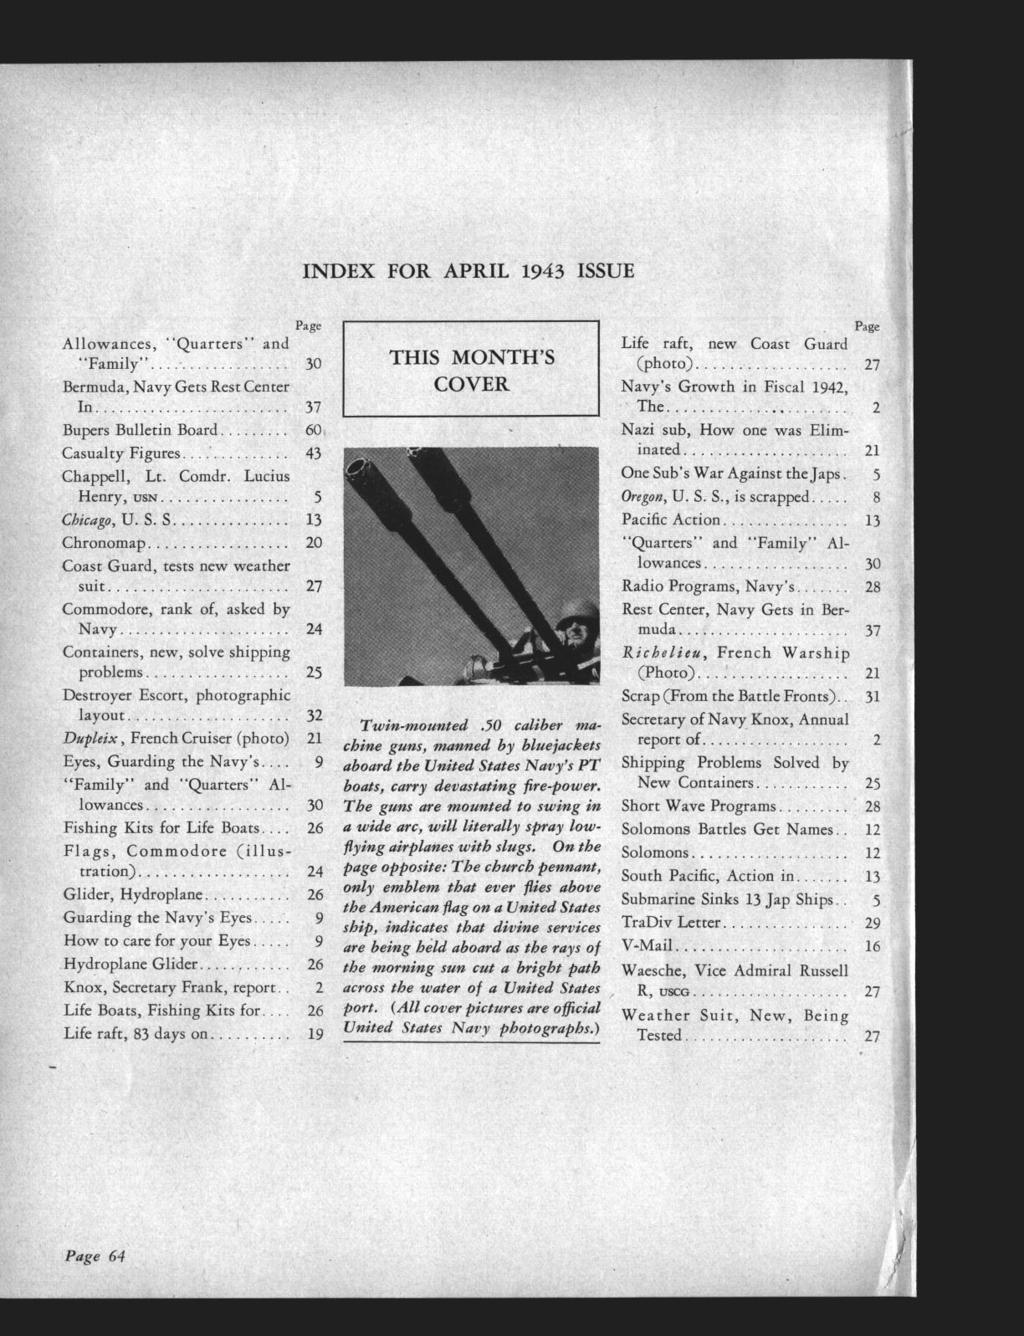 INDEX FOR APRIL 1943 ISSUE Pge Allownces, Qurters nd Fmdy.................. 30..,, THIS MONTH S COVER Bermud, Nvy Gets Rest Center In... 37 Bupers Bulletin Bord......... GO, Csulty Figures.